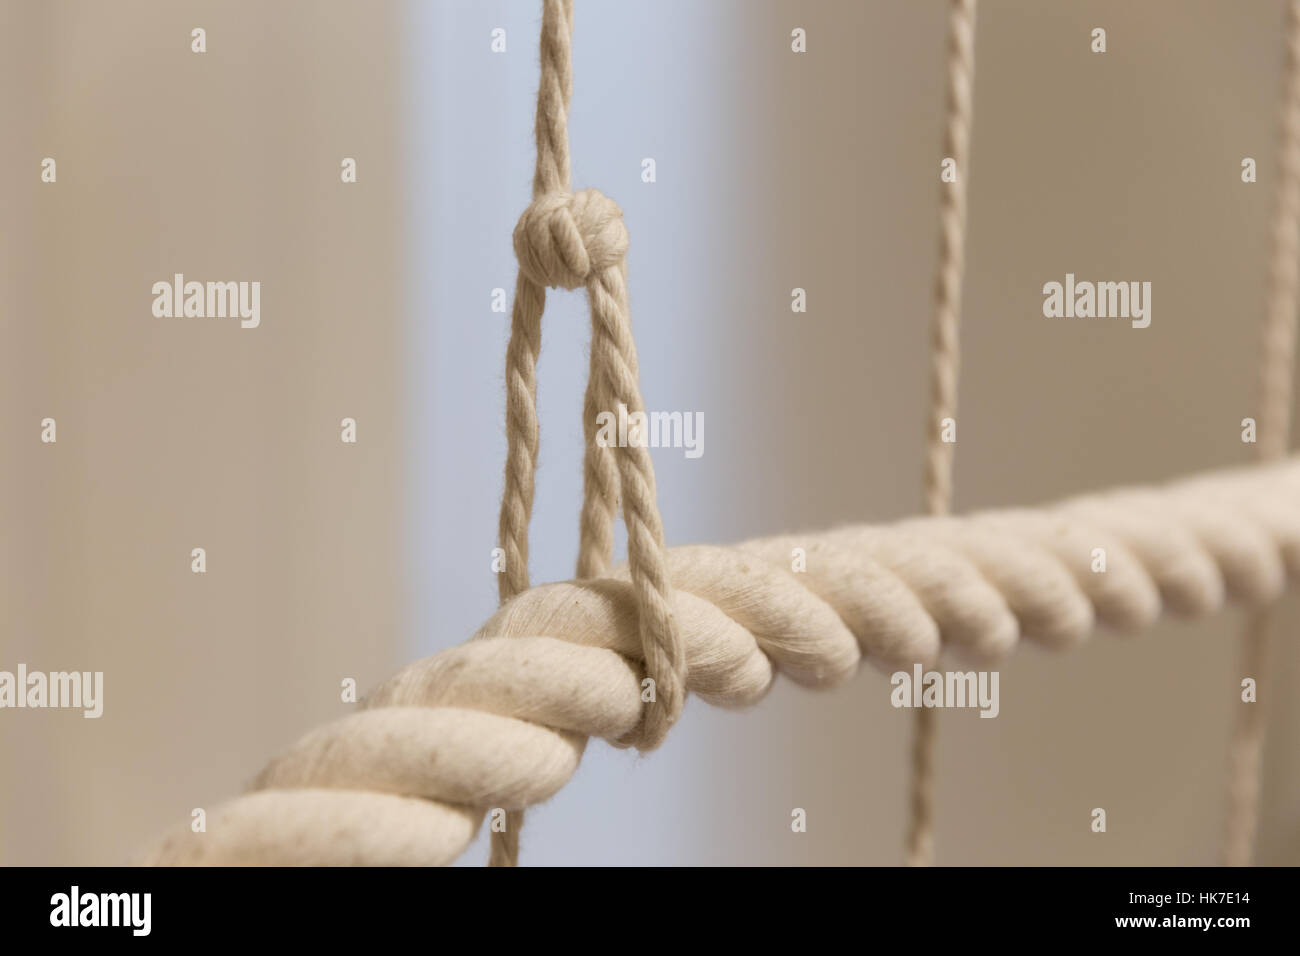 Architecture Detail of a Rope Banister Stock Photo